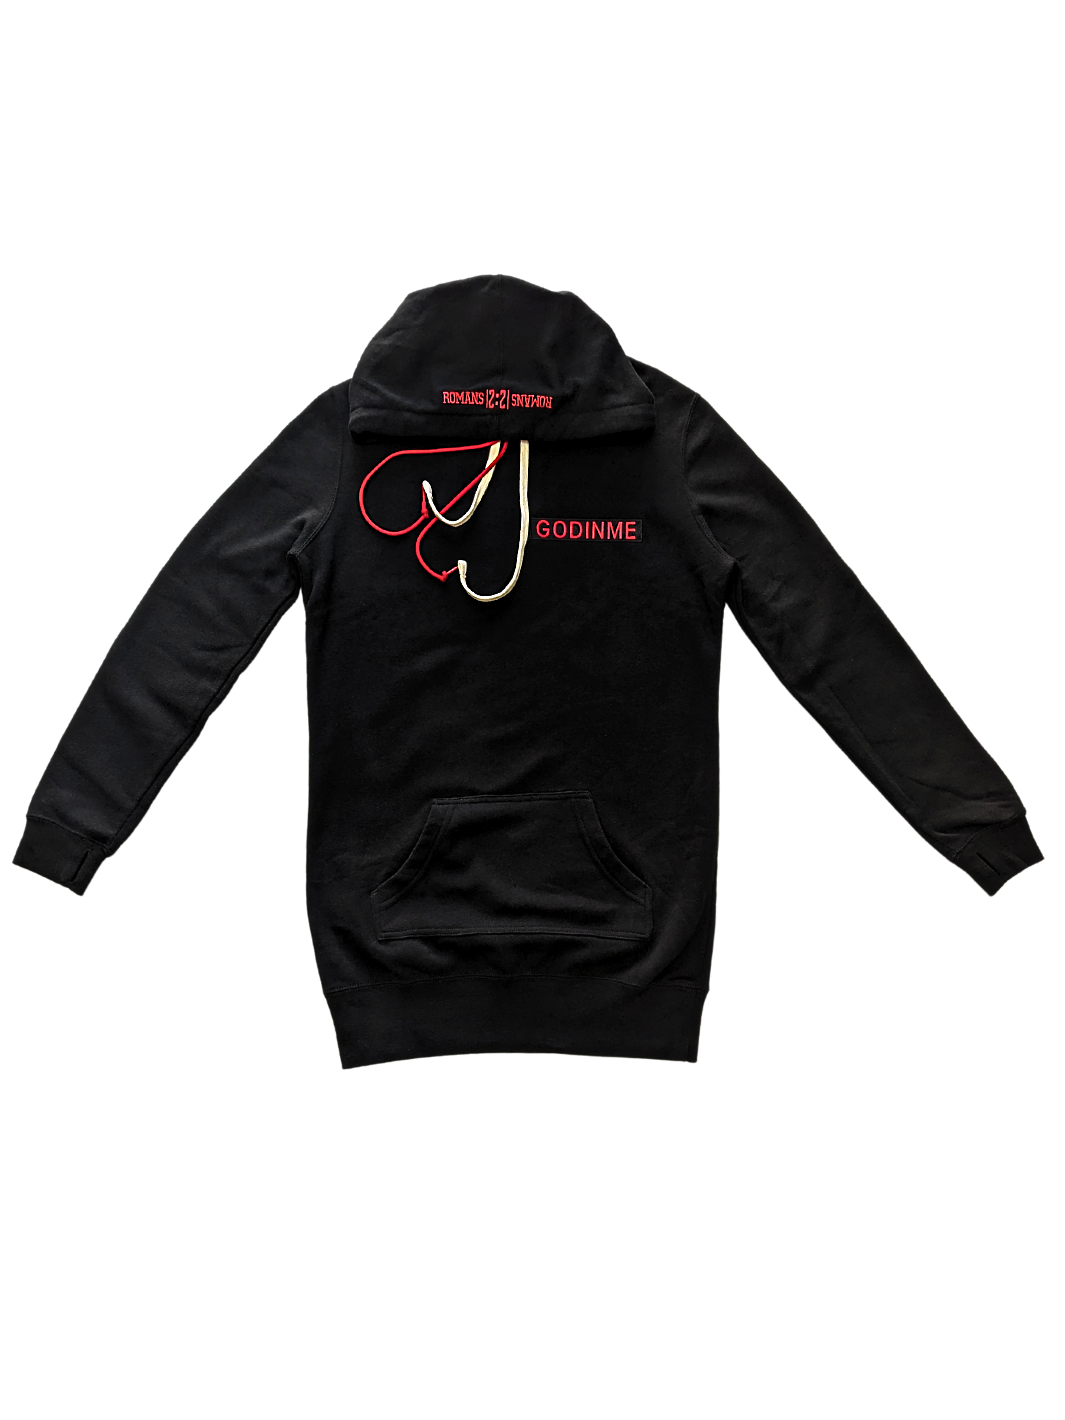 Black Hoodie dress exclusive collection with Red GODinme nameplate and Romans 12 :21 on Hood.